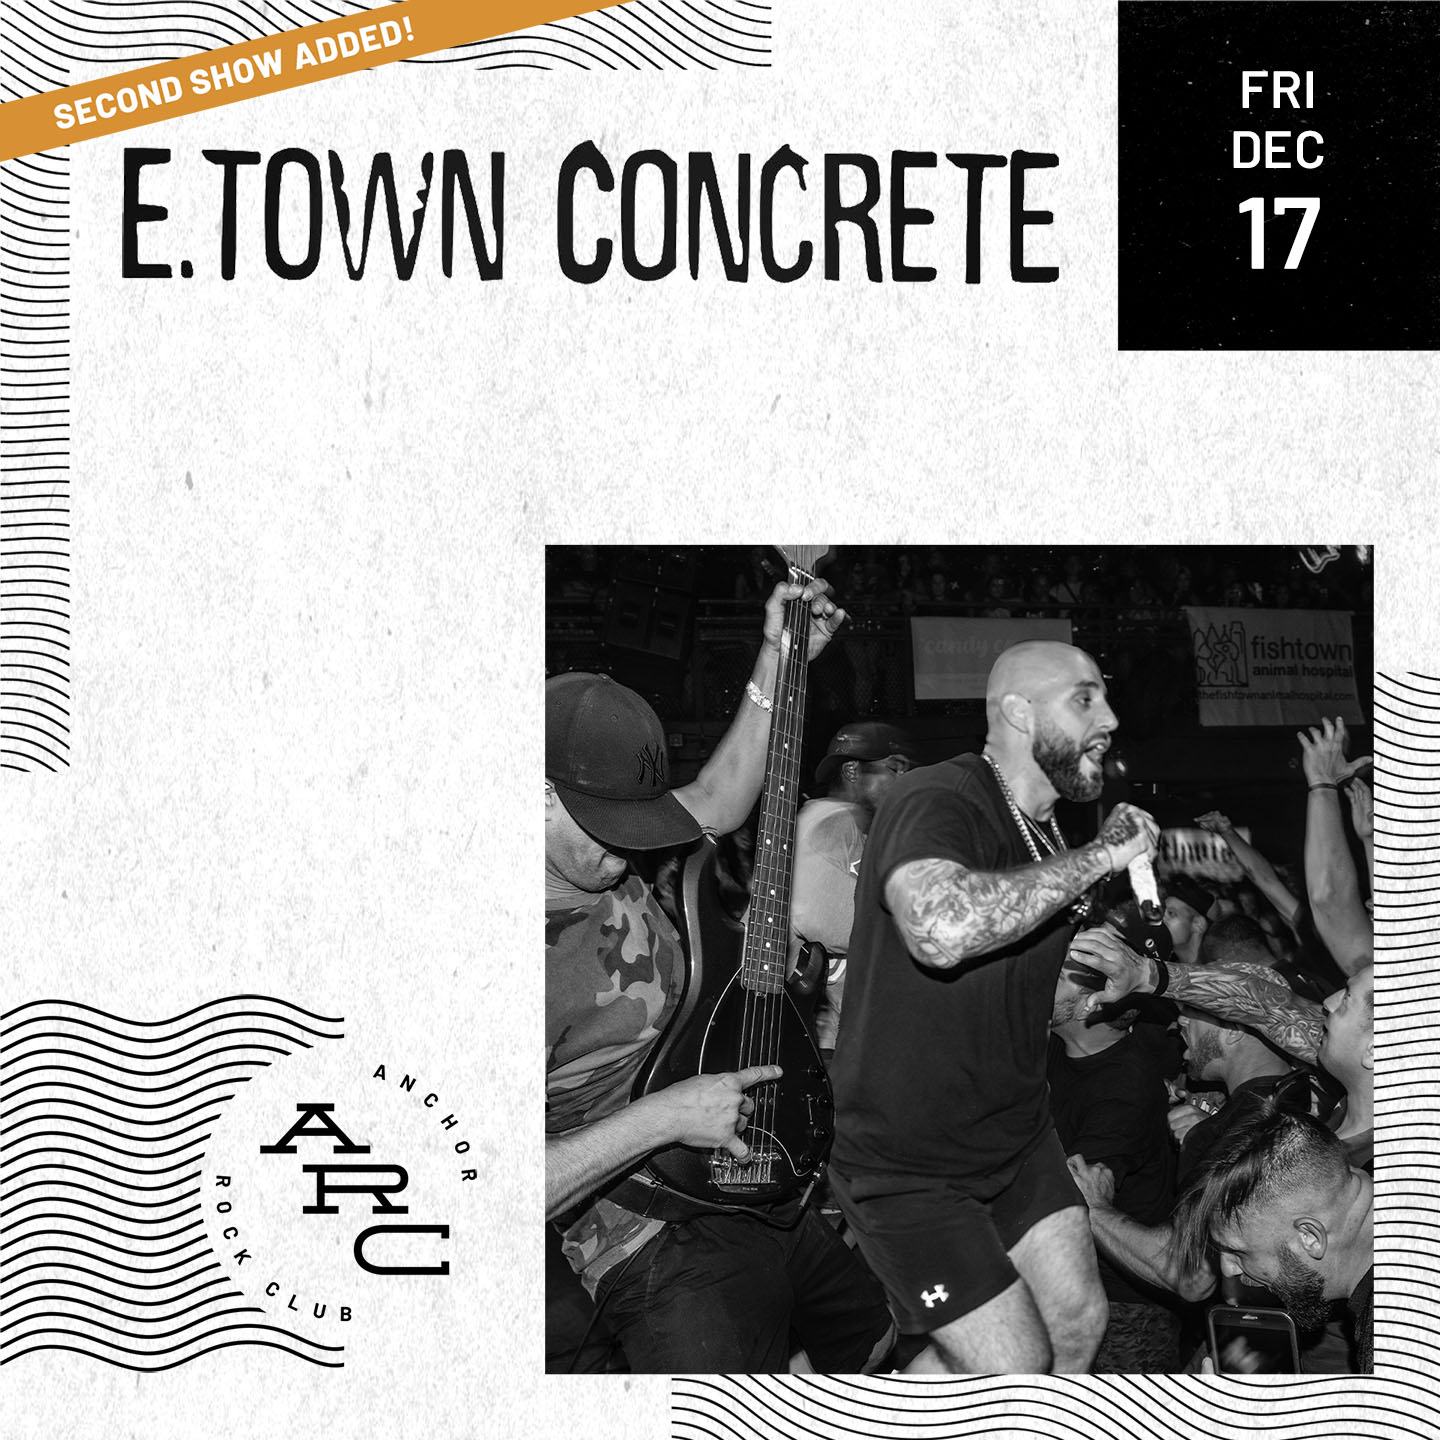 E.Town Concrete Tickets at Anchor Rock Club in Atlantic City by Anchor